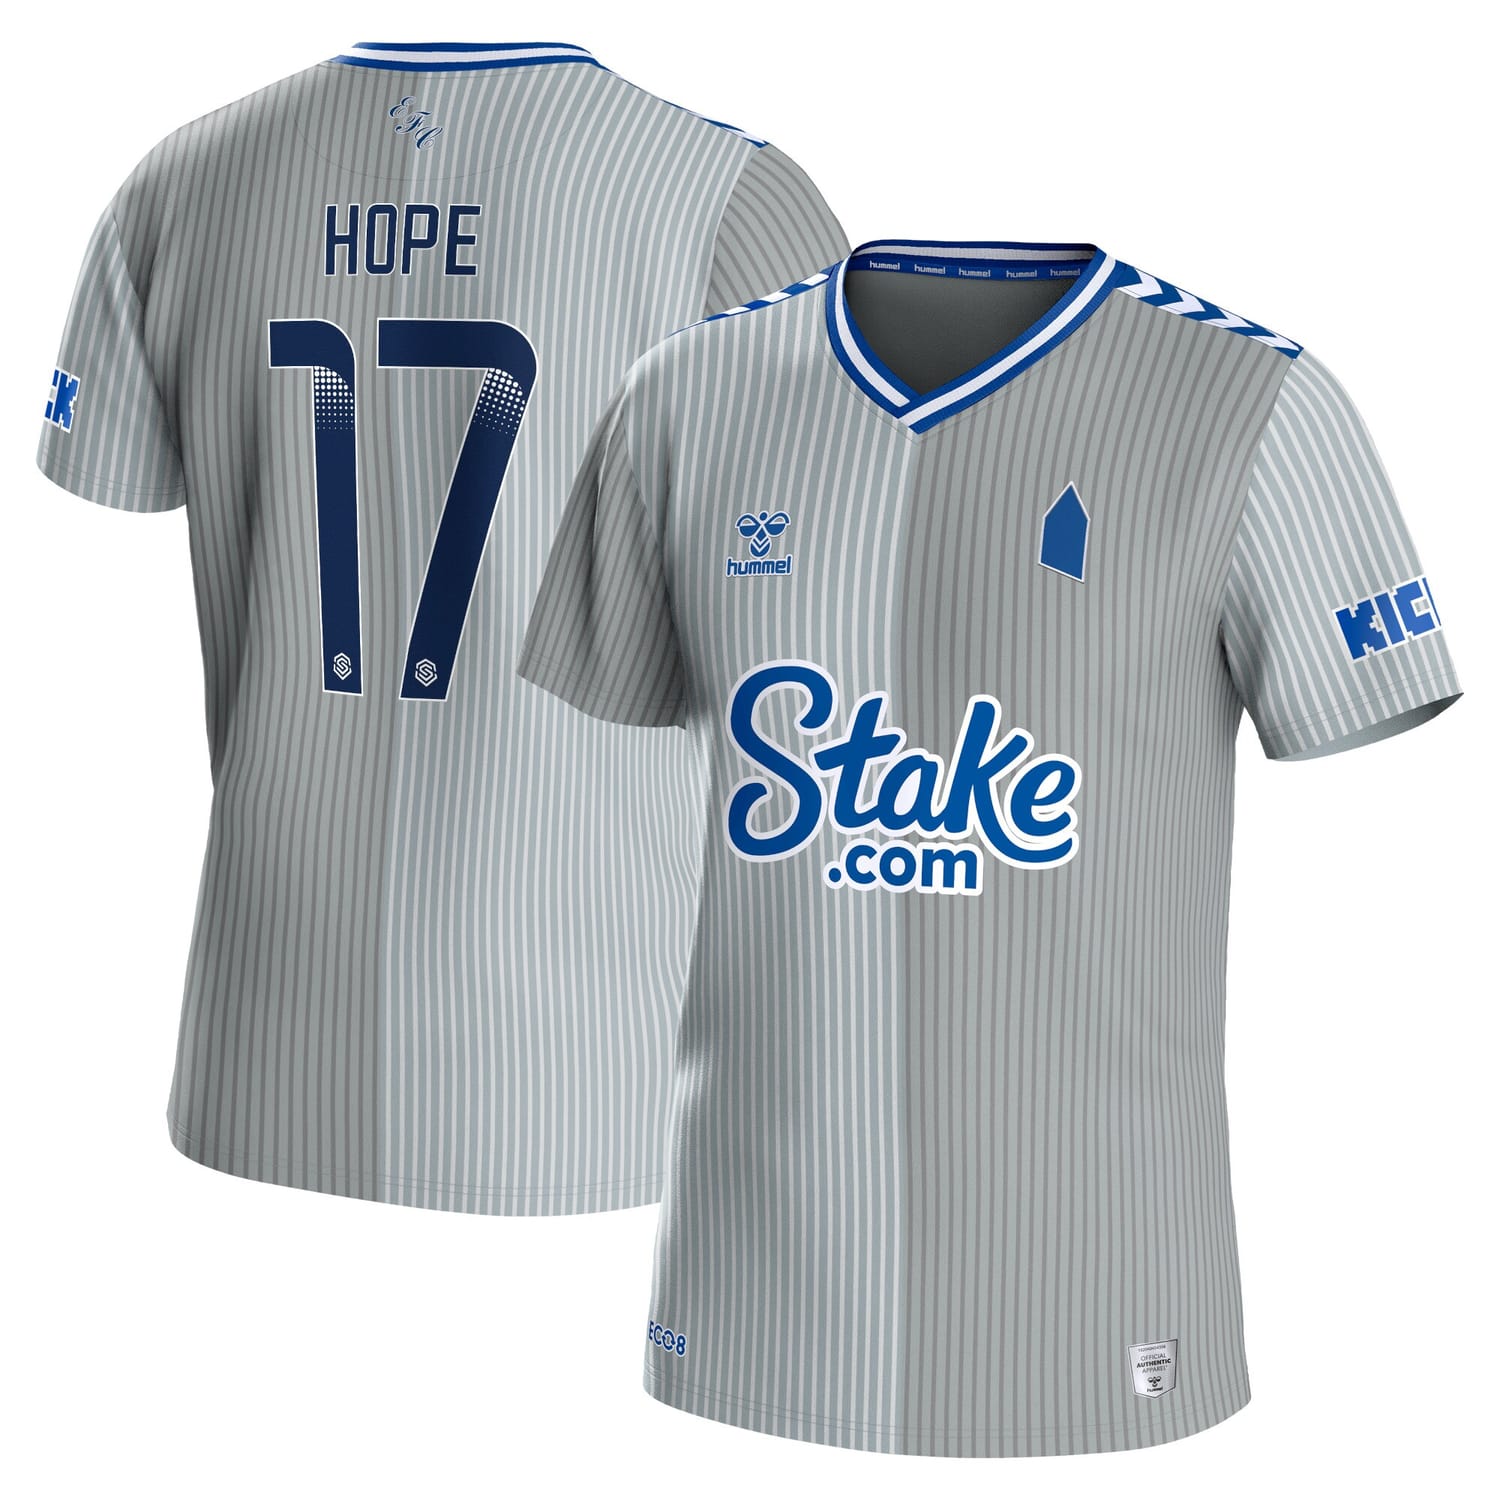 Premier League Everton Third WSL Jersey Shirt 2023-24 player Lucy Hope 17 printing for Men